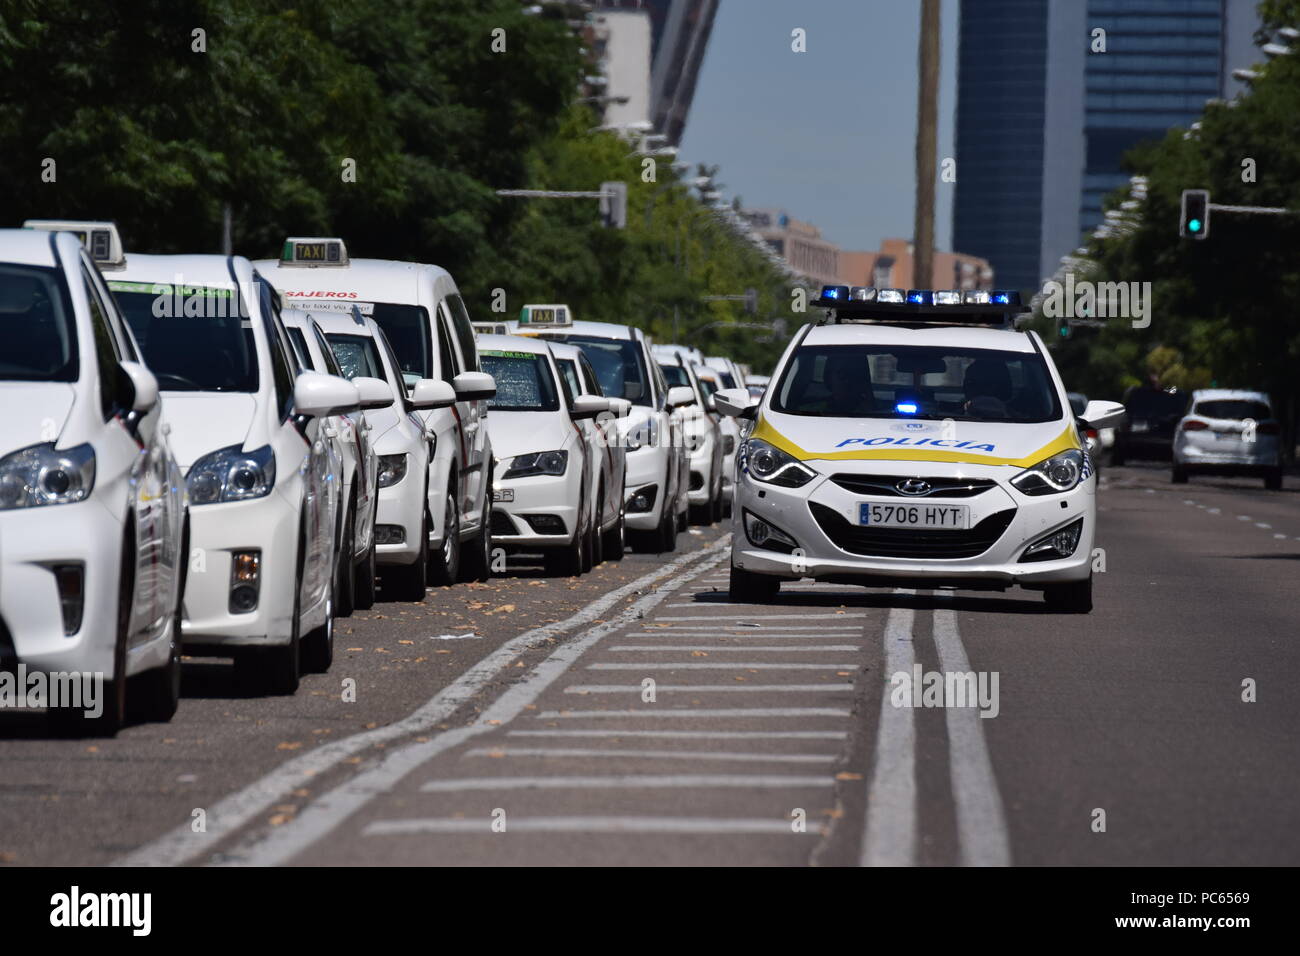 Madrid, Spain.  Taxis block an avenue amid a strike by cabbies in Madrid on July 31, 2018.    Taxi drivers across Spain kept striking against ride-hailing competitors such as Uber and Cabify, which they say unfairly threaten their livelihoods after government negotiations ended without a deal. The strike began in Barcelona last week and spread to Madrid at the weekend as drivers blocked main thoroughfares, demanding action from the government.  Sierra/797/Cordon Press Stock Photo